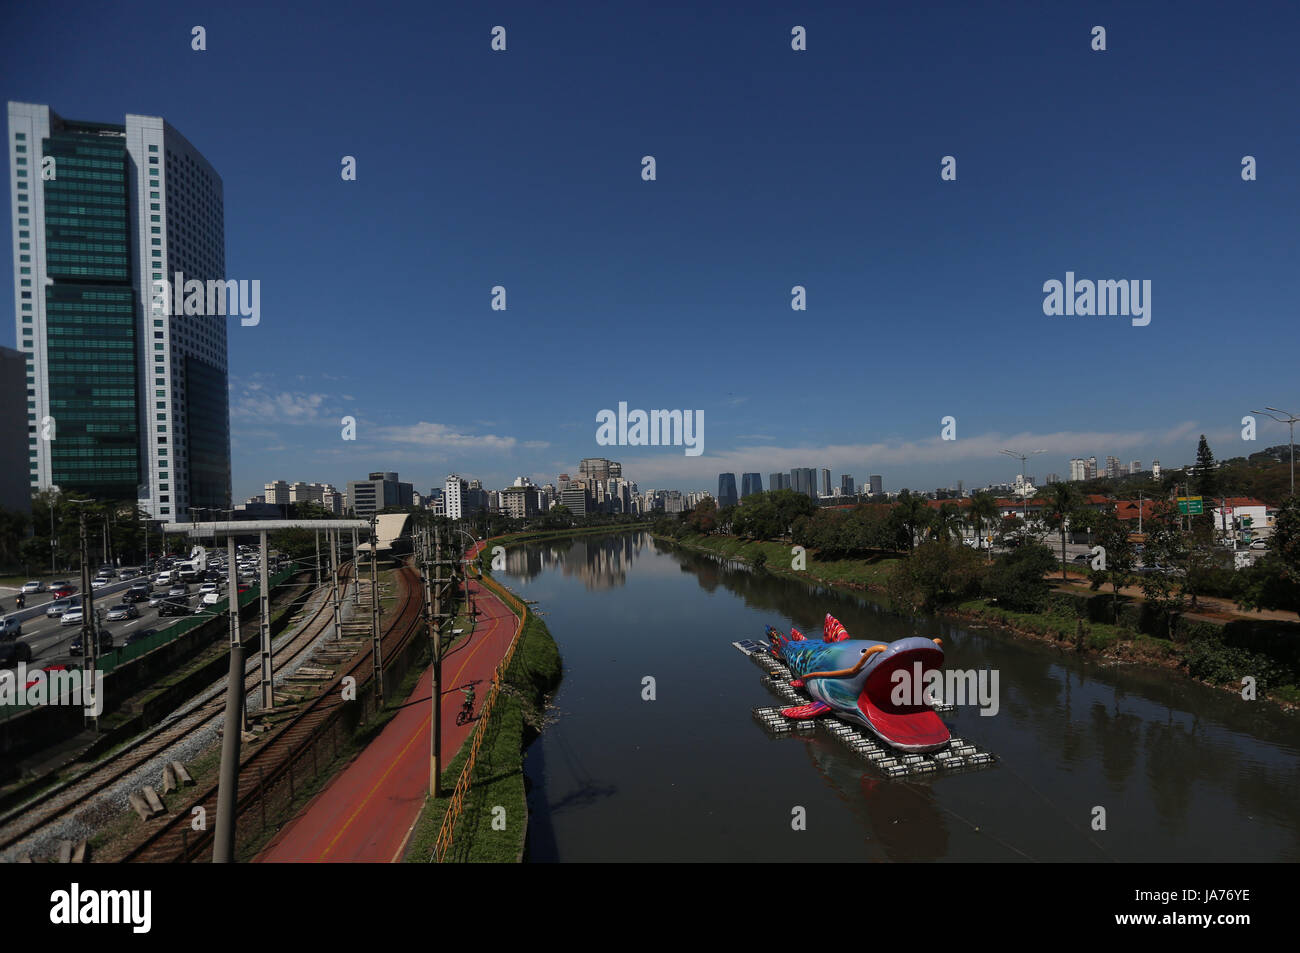 (170825) -- SAO PAULO, Aug. 25, 2017 (Xinhua) -- A representation of a giant fish, 30 meters long and 7 meters high, floats through the Pinheiros river, in Sao Paulo, Brazil, on Aug. 24, 2017. The floating urban intervention called 'Pintado' is a work of the Brazilian plastic artist Eduardo Srur, and is part of an event called 'Virada Sustentavel', that takes place on Aug. 24 to 27 in Sao Paulo, with the objetive of taking to society the actions related with sustainable living. (Xinhua/Rahel Patrasso) (da) (fnc) Stock Photo